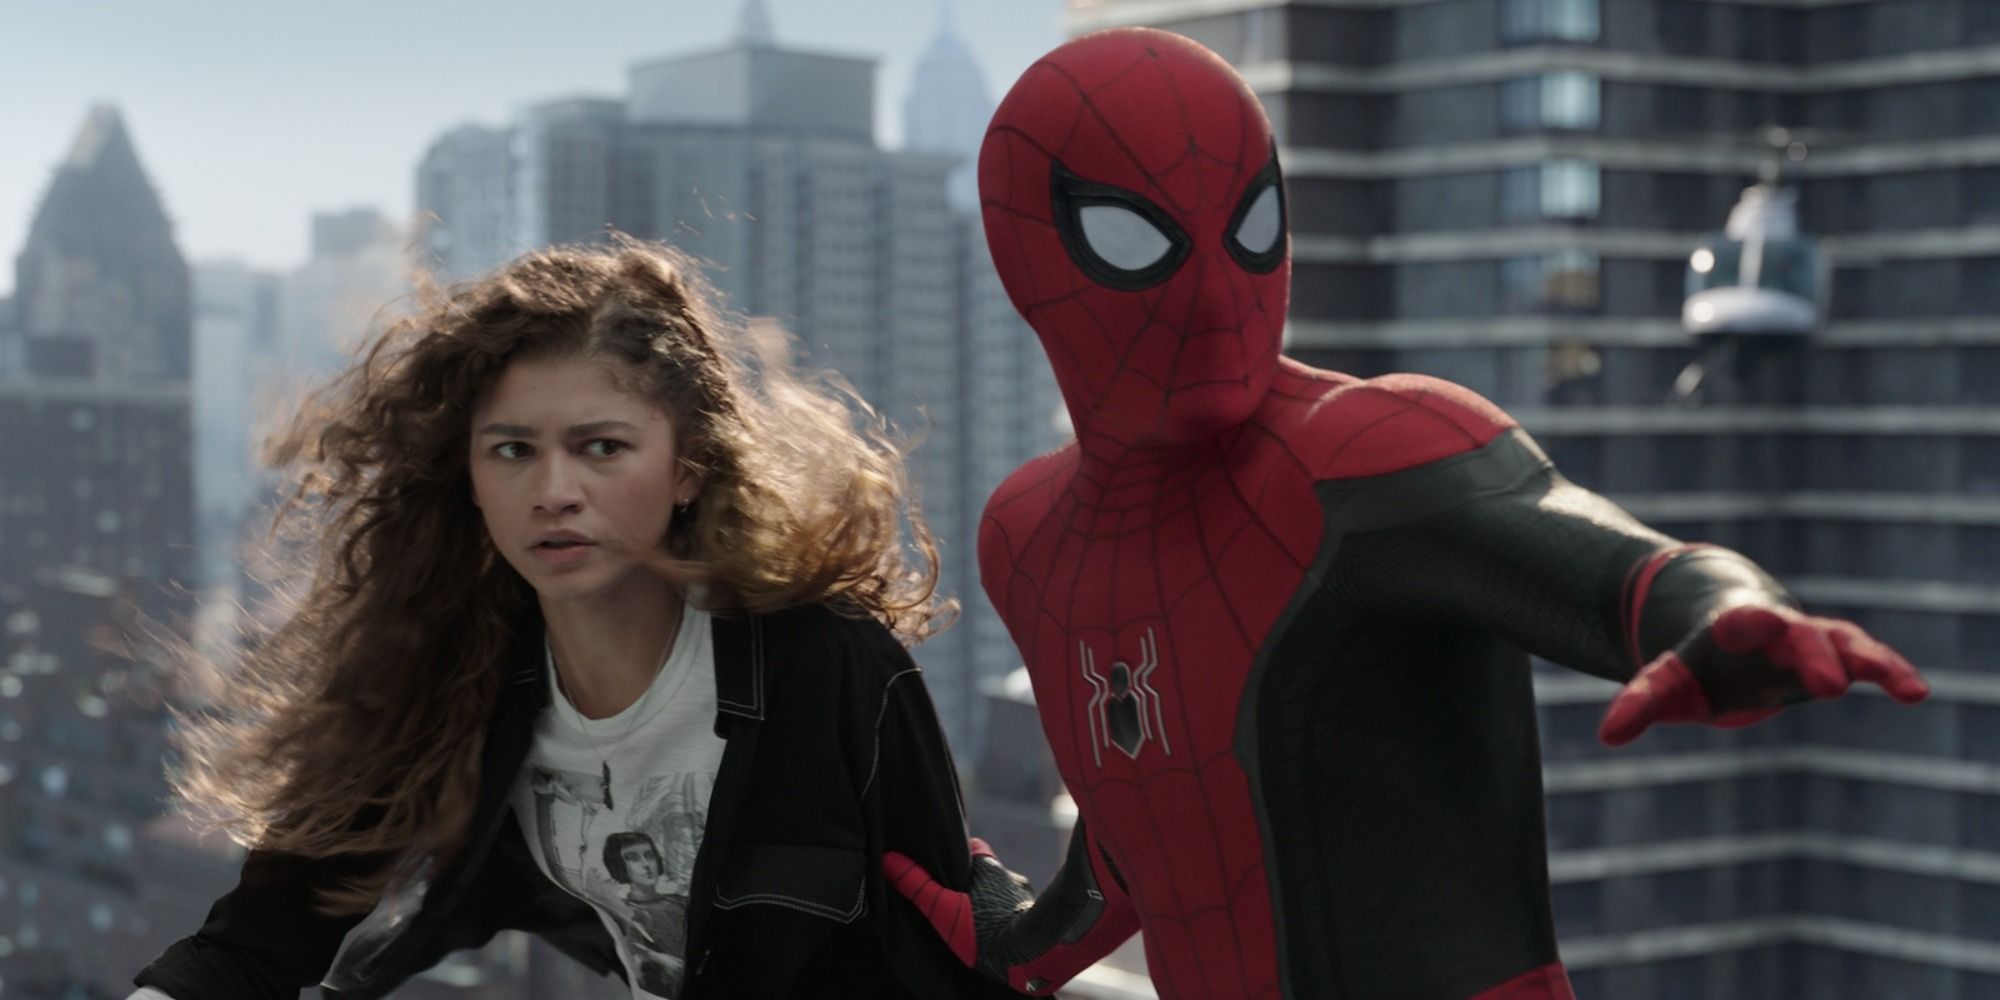 Spider-Man with MJ (Zendaya) during an action scene